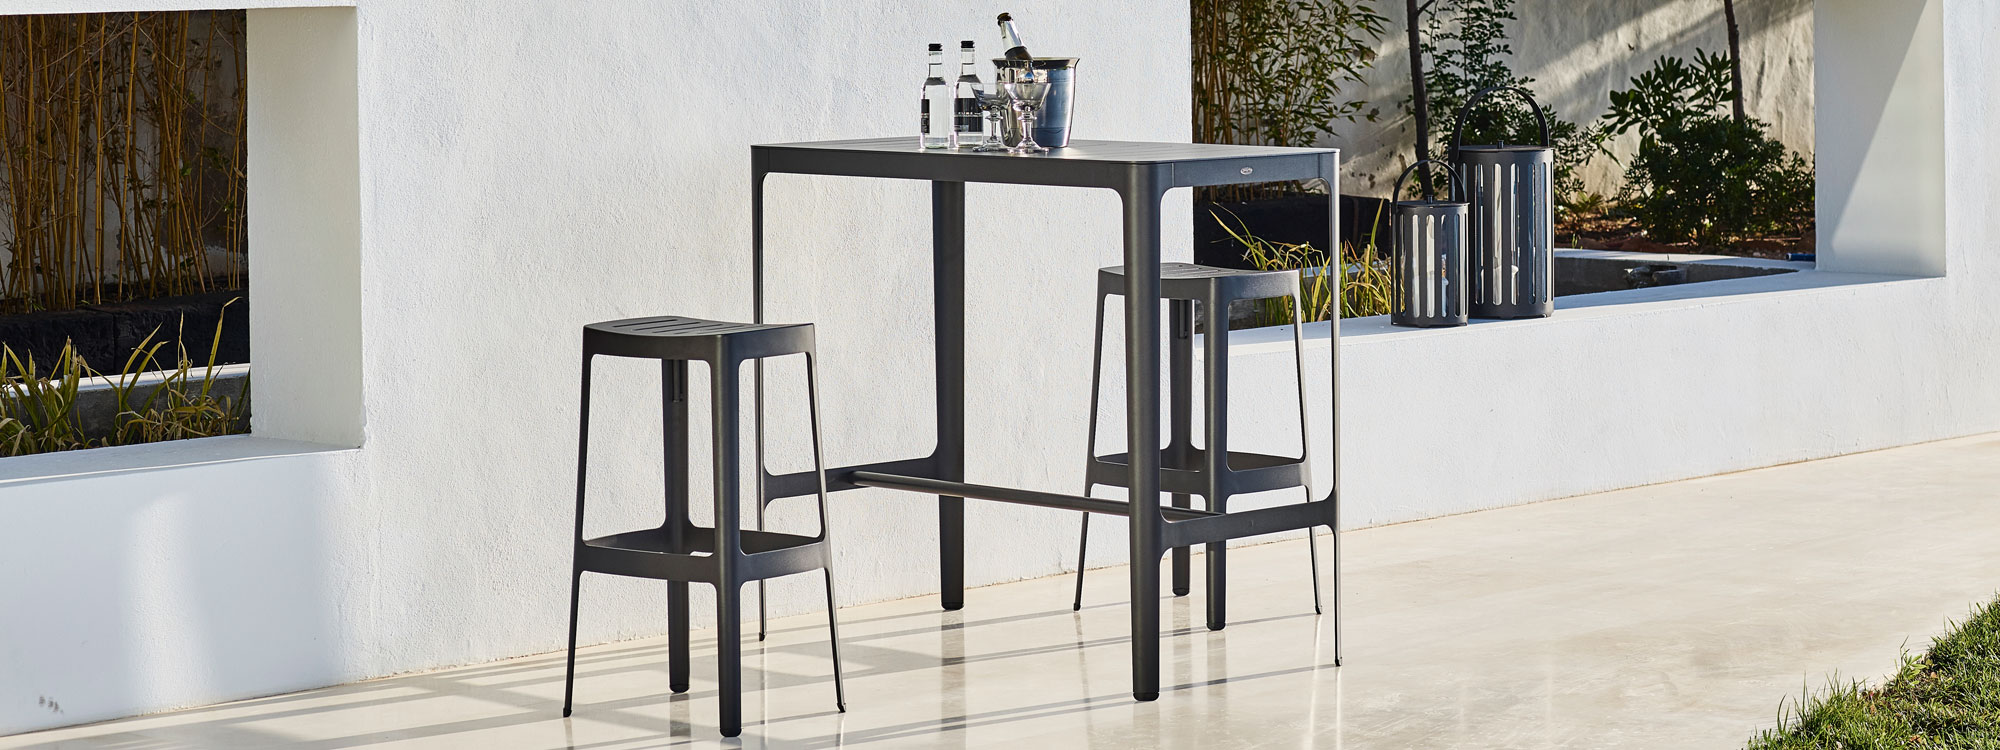 Black Cut modern outdoor bar furniture is a minimalist exterior bar set in all-weather furniture materials by Cane-line garden furniture company